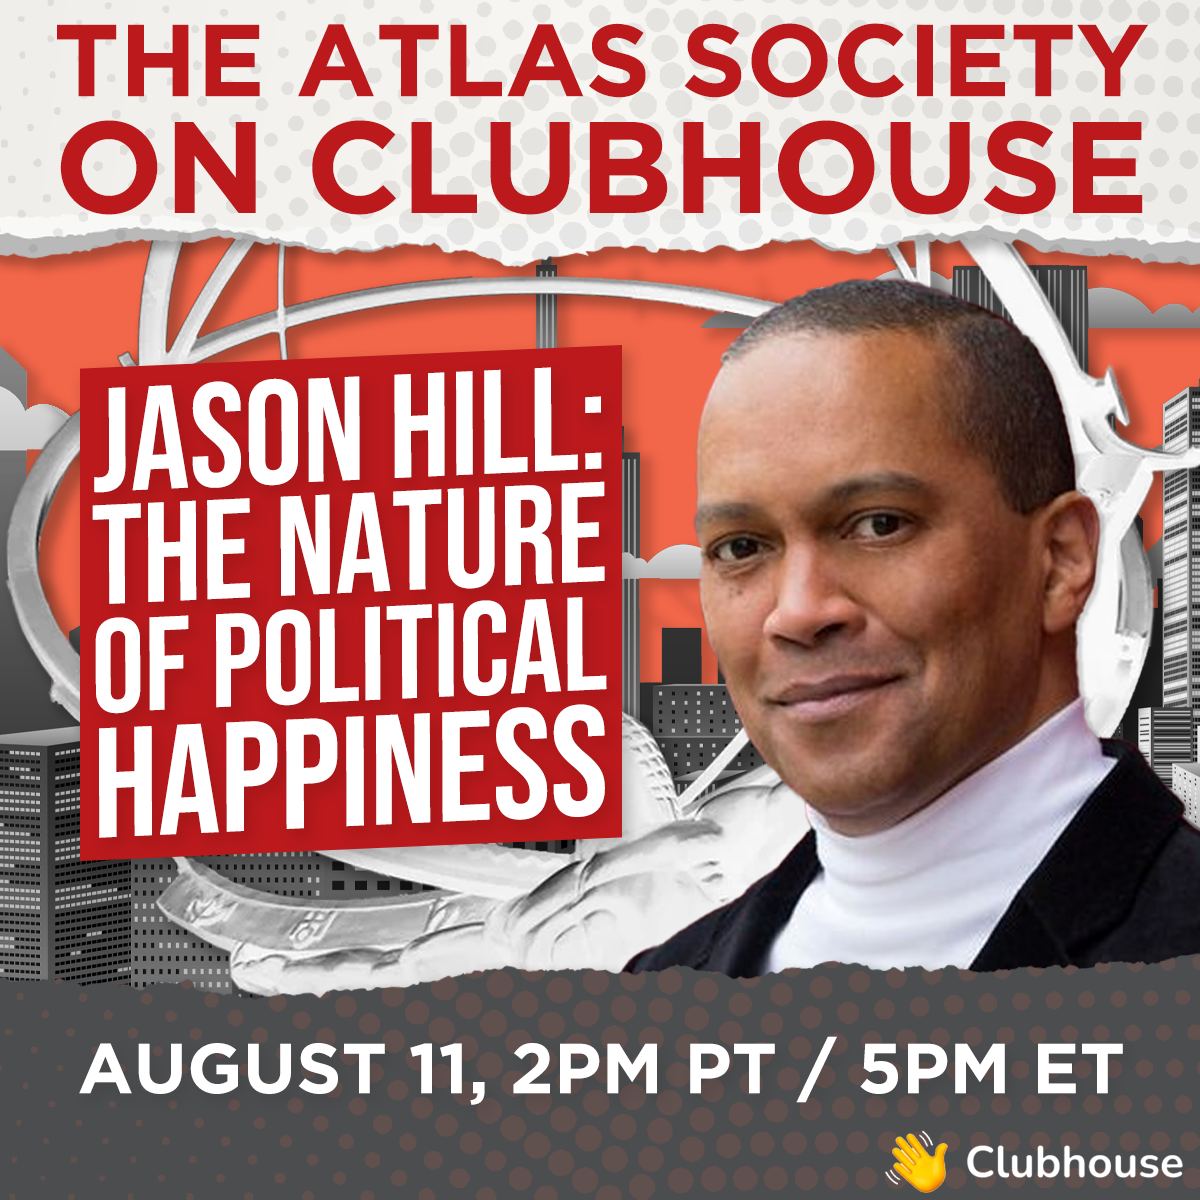 Jason Hill - The Nature of Political Happiness